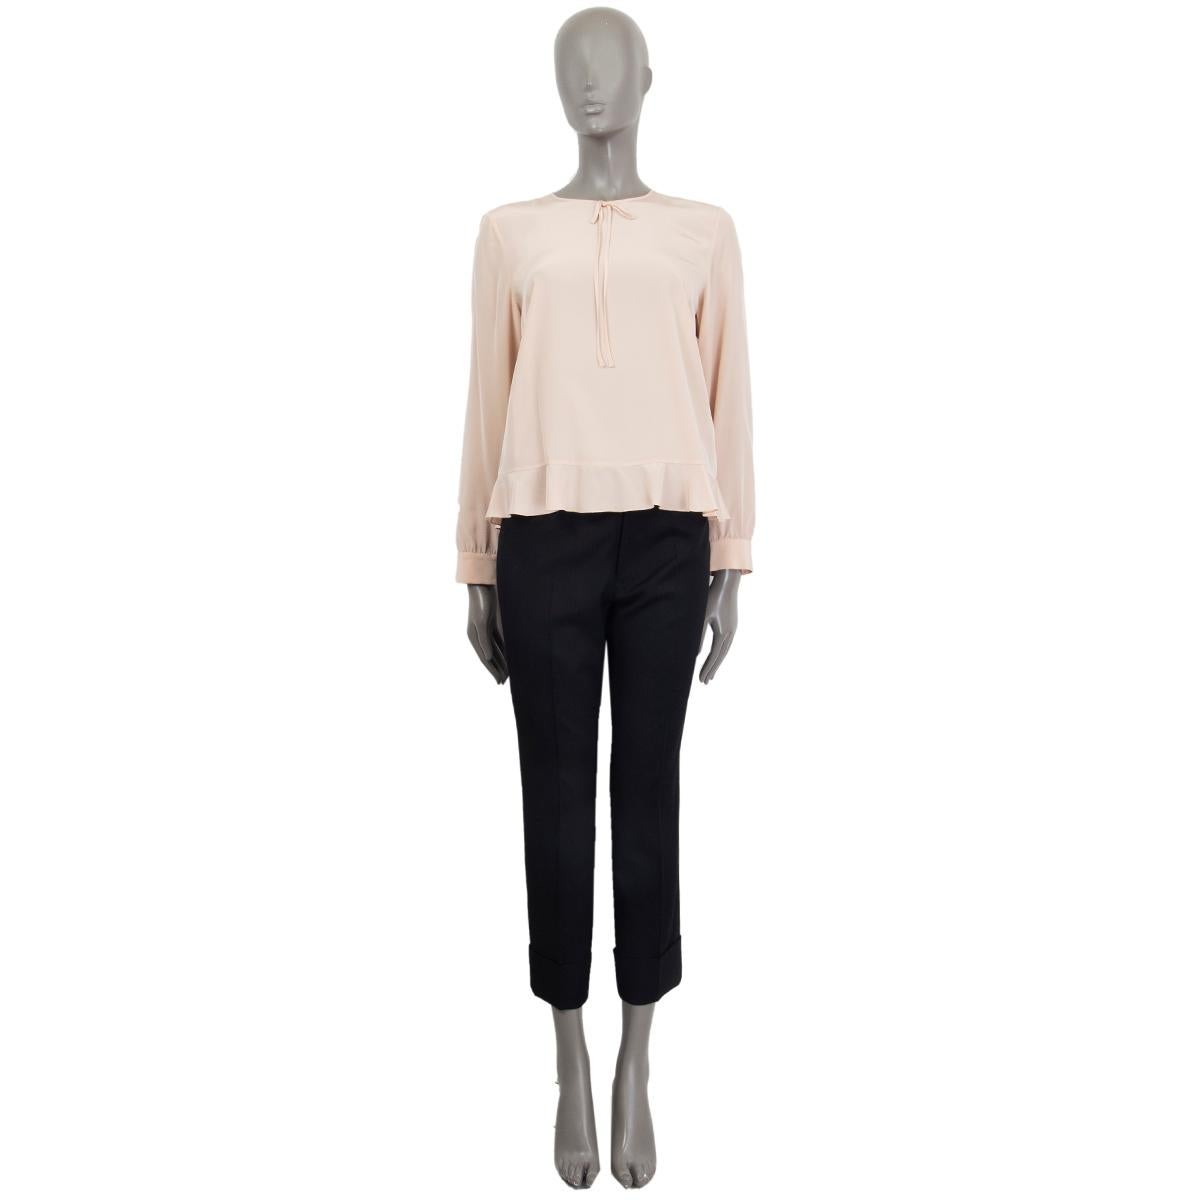 100% authentic R.E.D. Valentino long-sleeve round-neck blouse in nude silk (100%) with little bow detail and ruffle trim. Has been worn and is in excellent condition. 

Tag Size	42
Size	M
Shoulder Width	41cm (16in)
Bust To	96cm (37.4in)
Waist